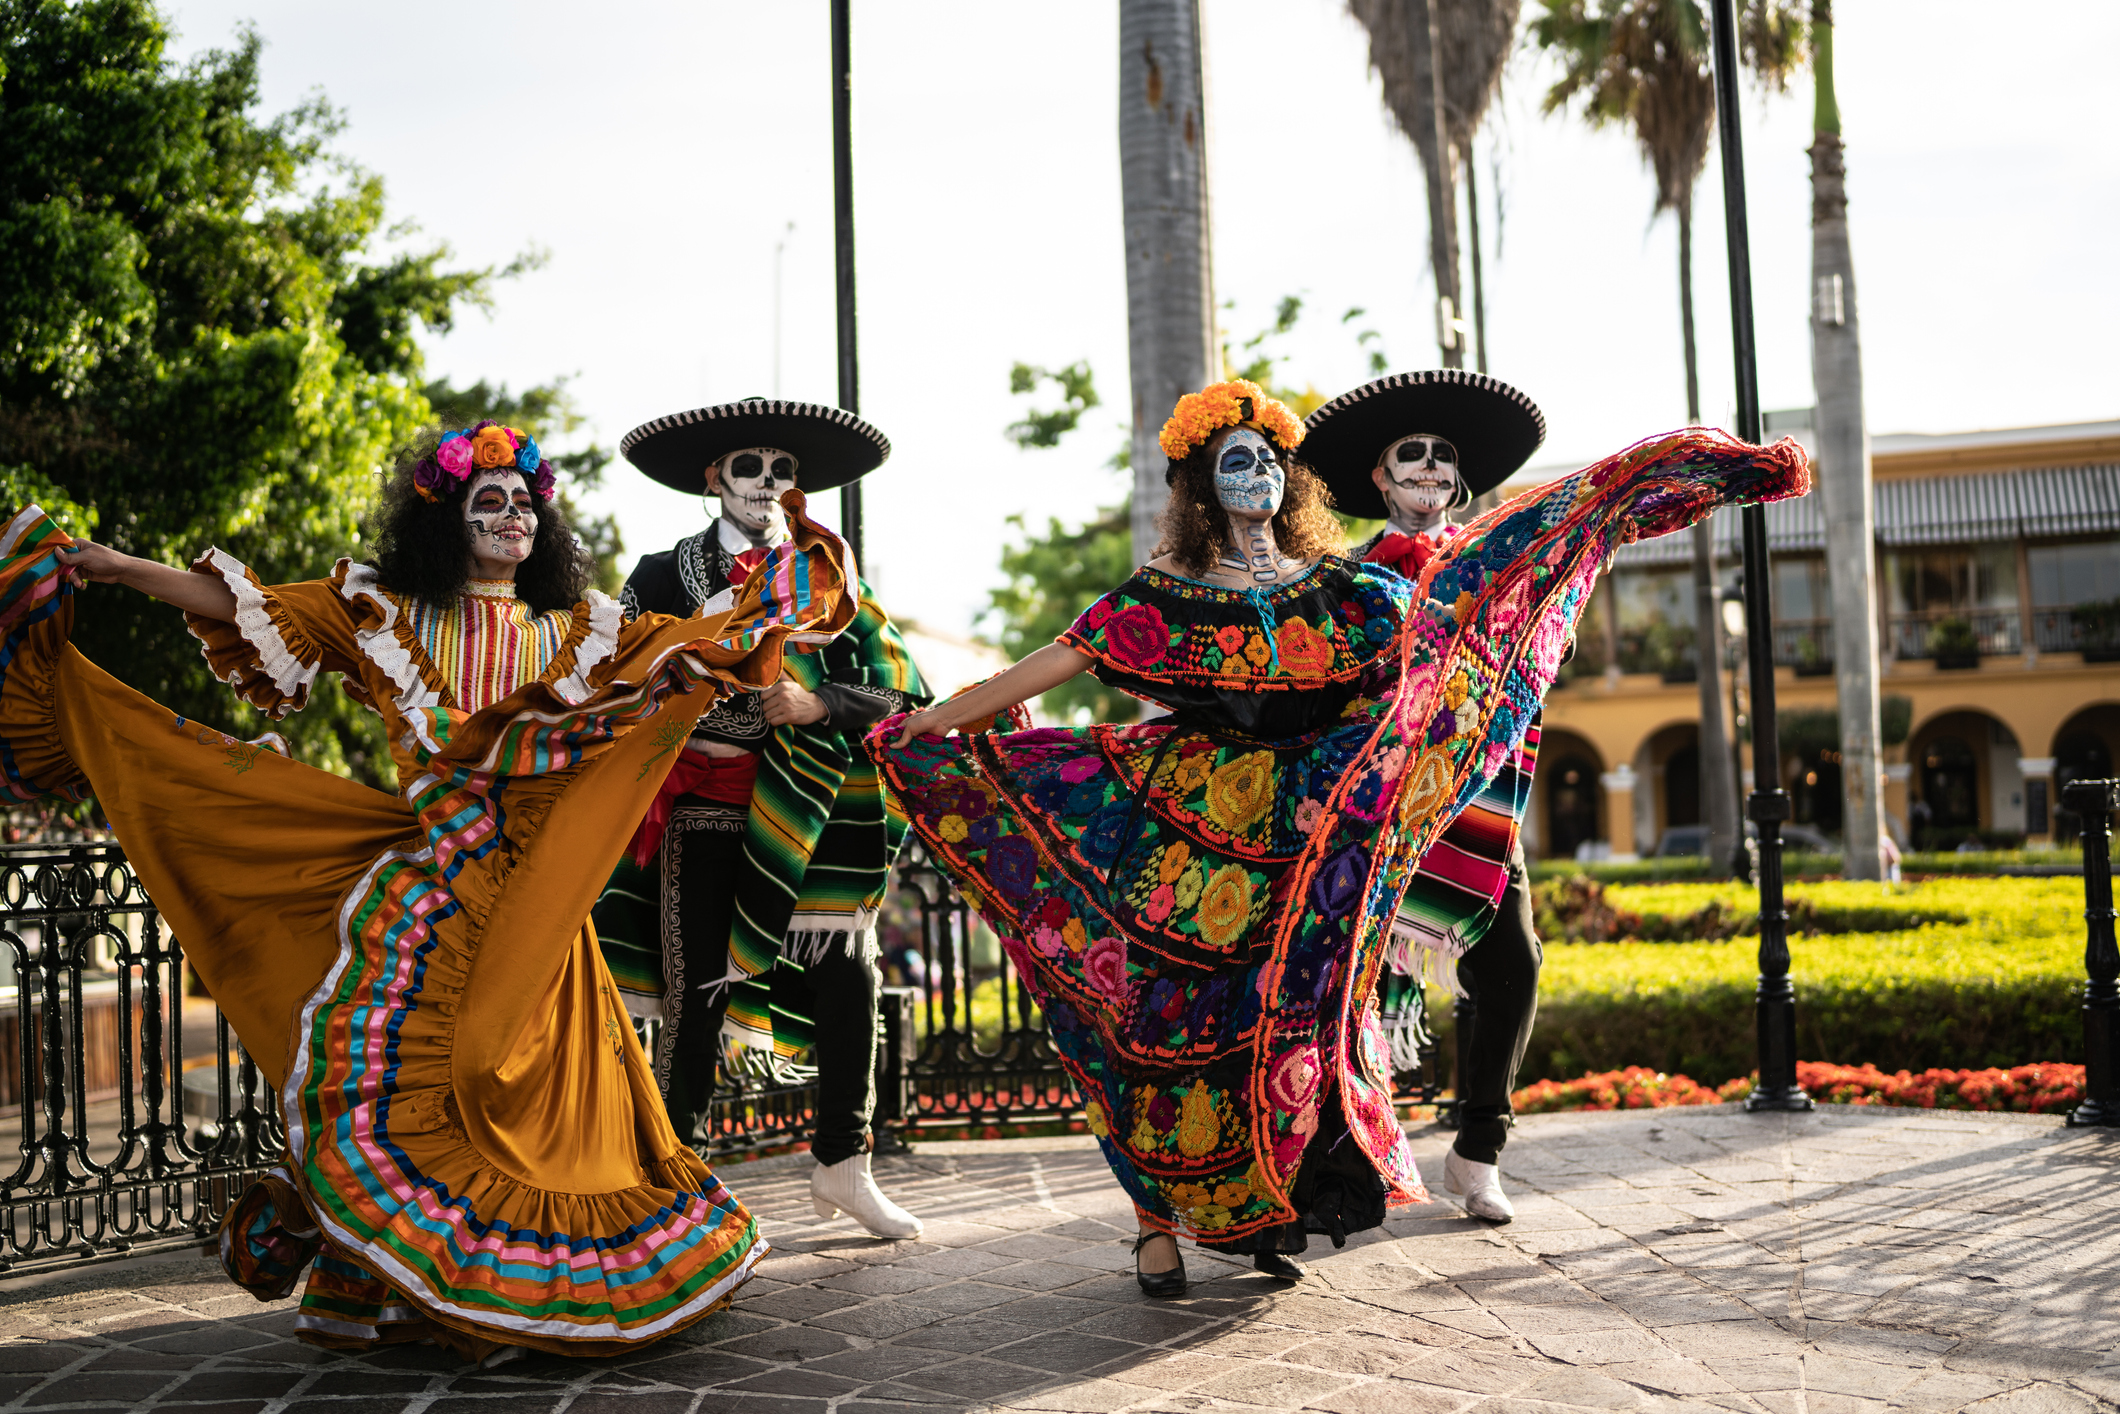 mexico-holiday-day-of-the-dead-cultural-celebration-holiday-social-studies-teaching-classroom